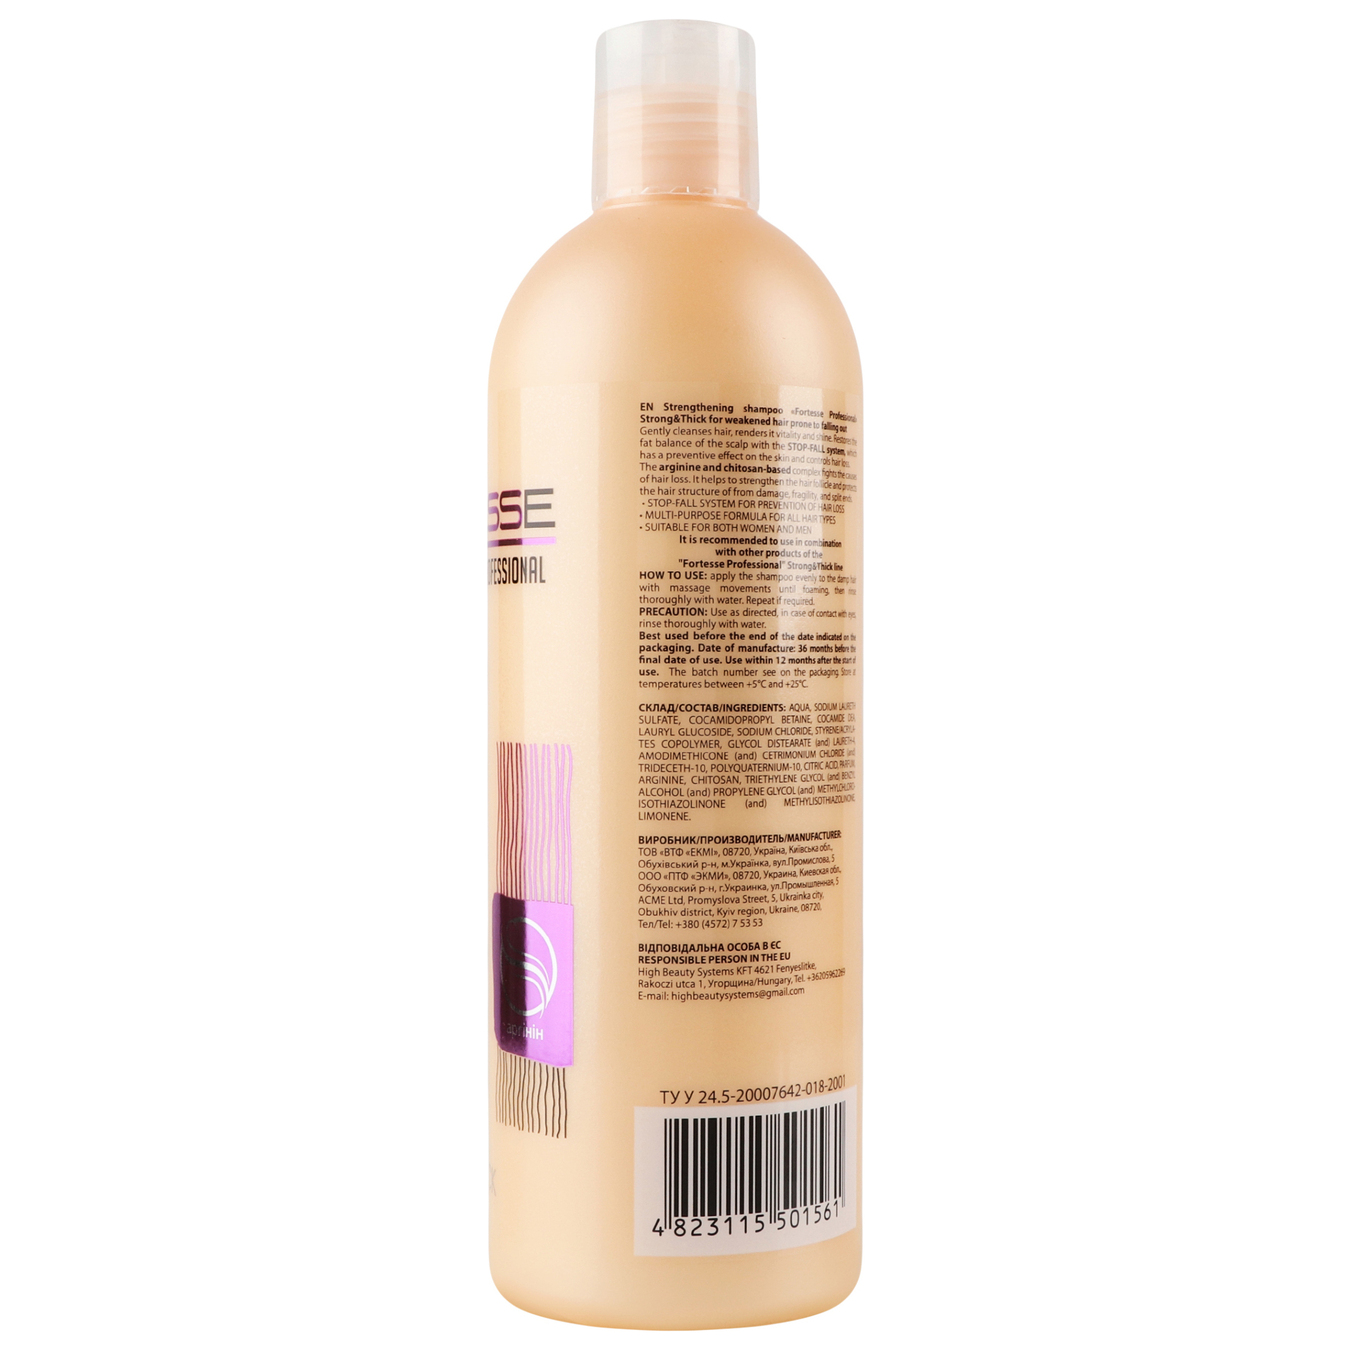 Fortesse Professional strong&thick strengthening shampoo for weakened hair prone to hair loss 400ml 5